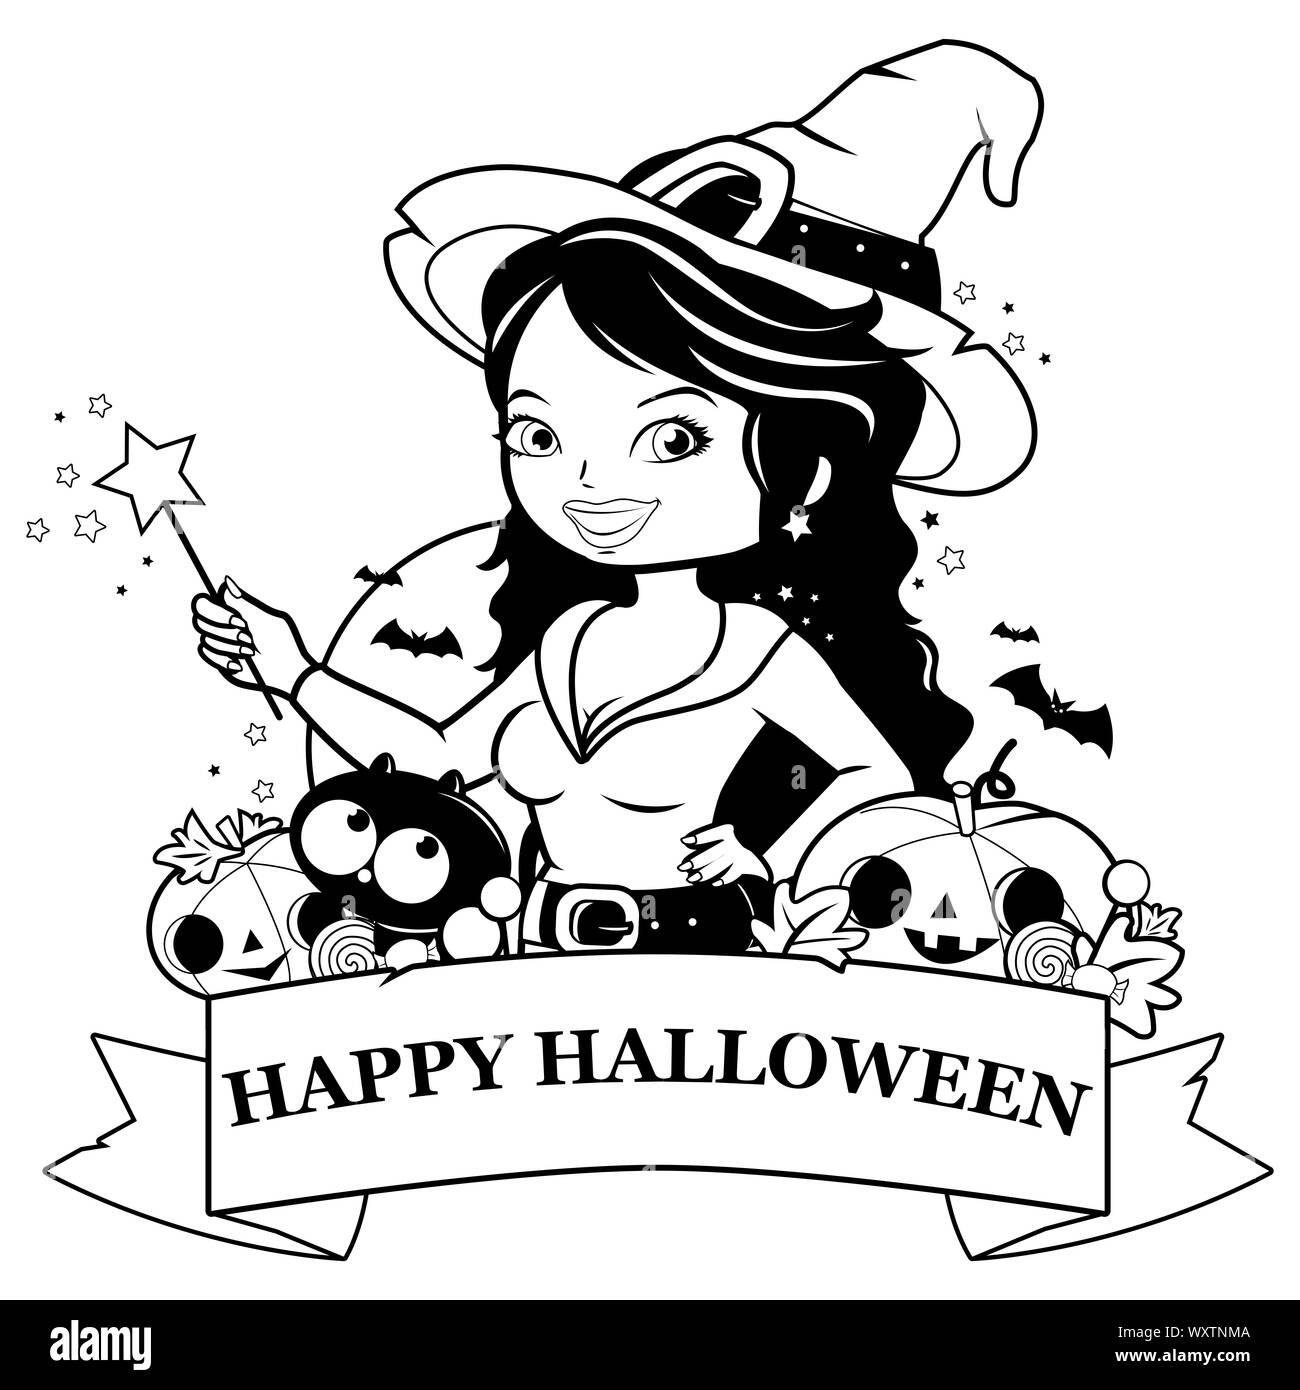 Halloween witch, pumpkins and treats. Black and white coloring book page. Stock Photo